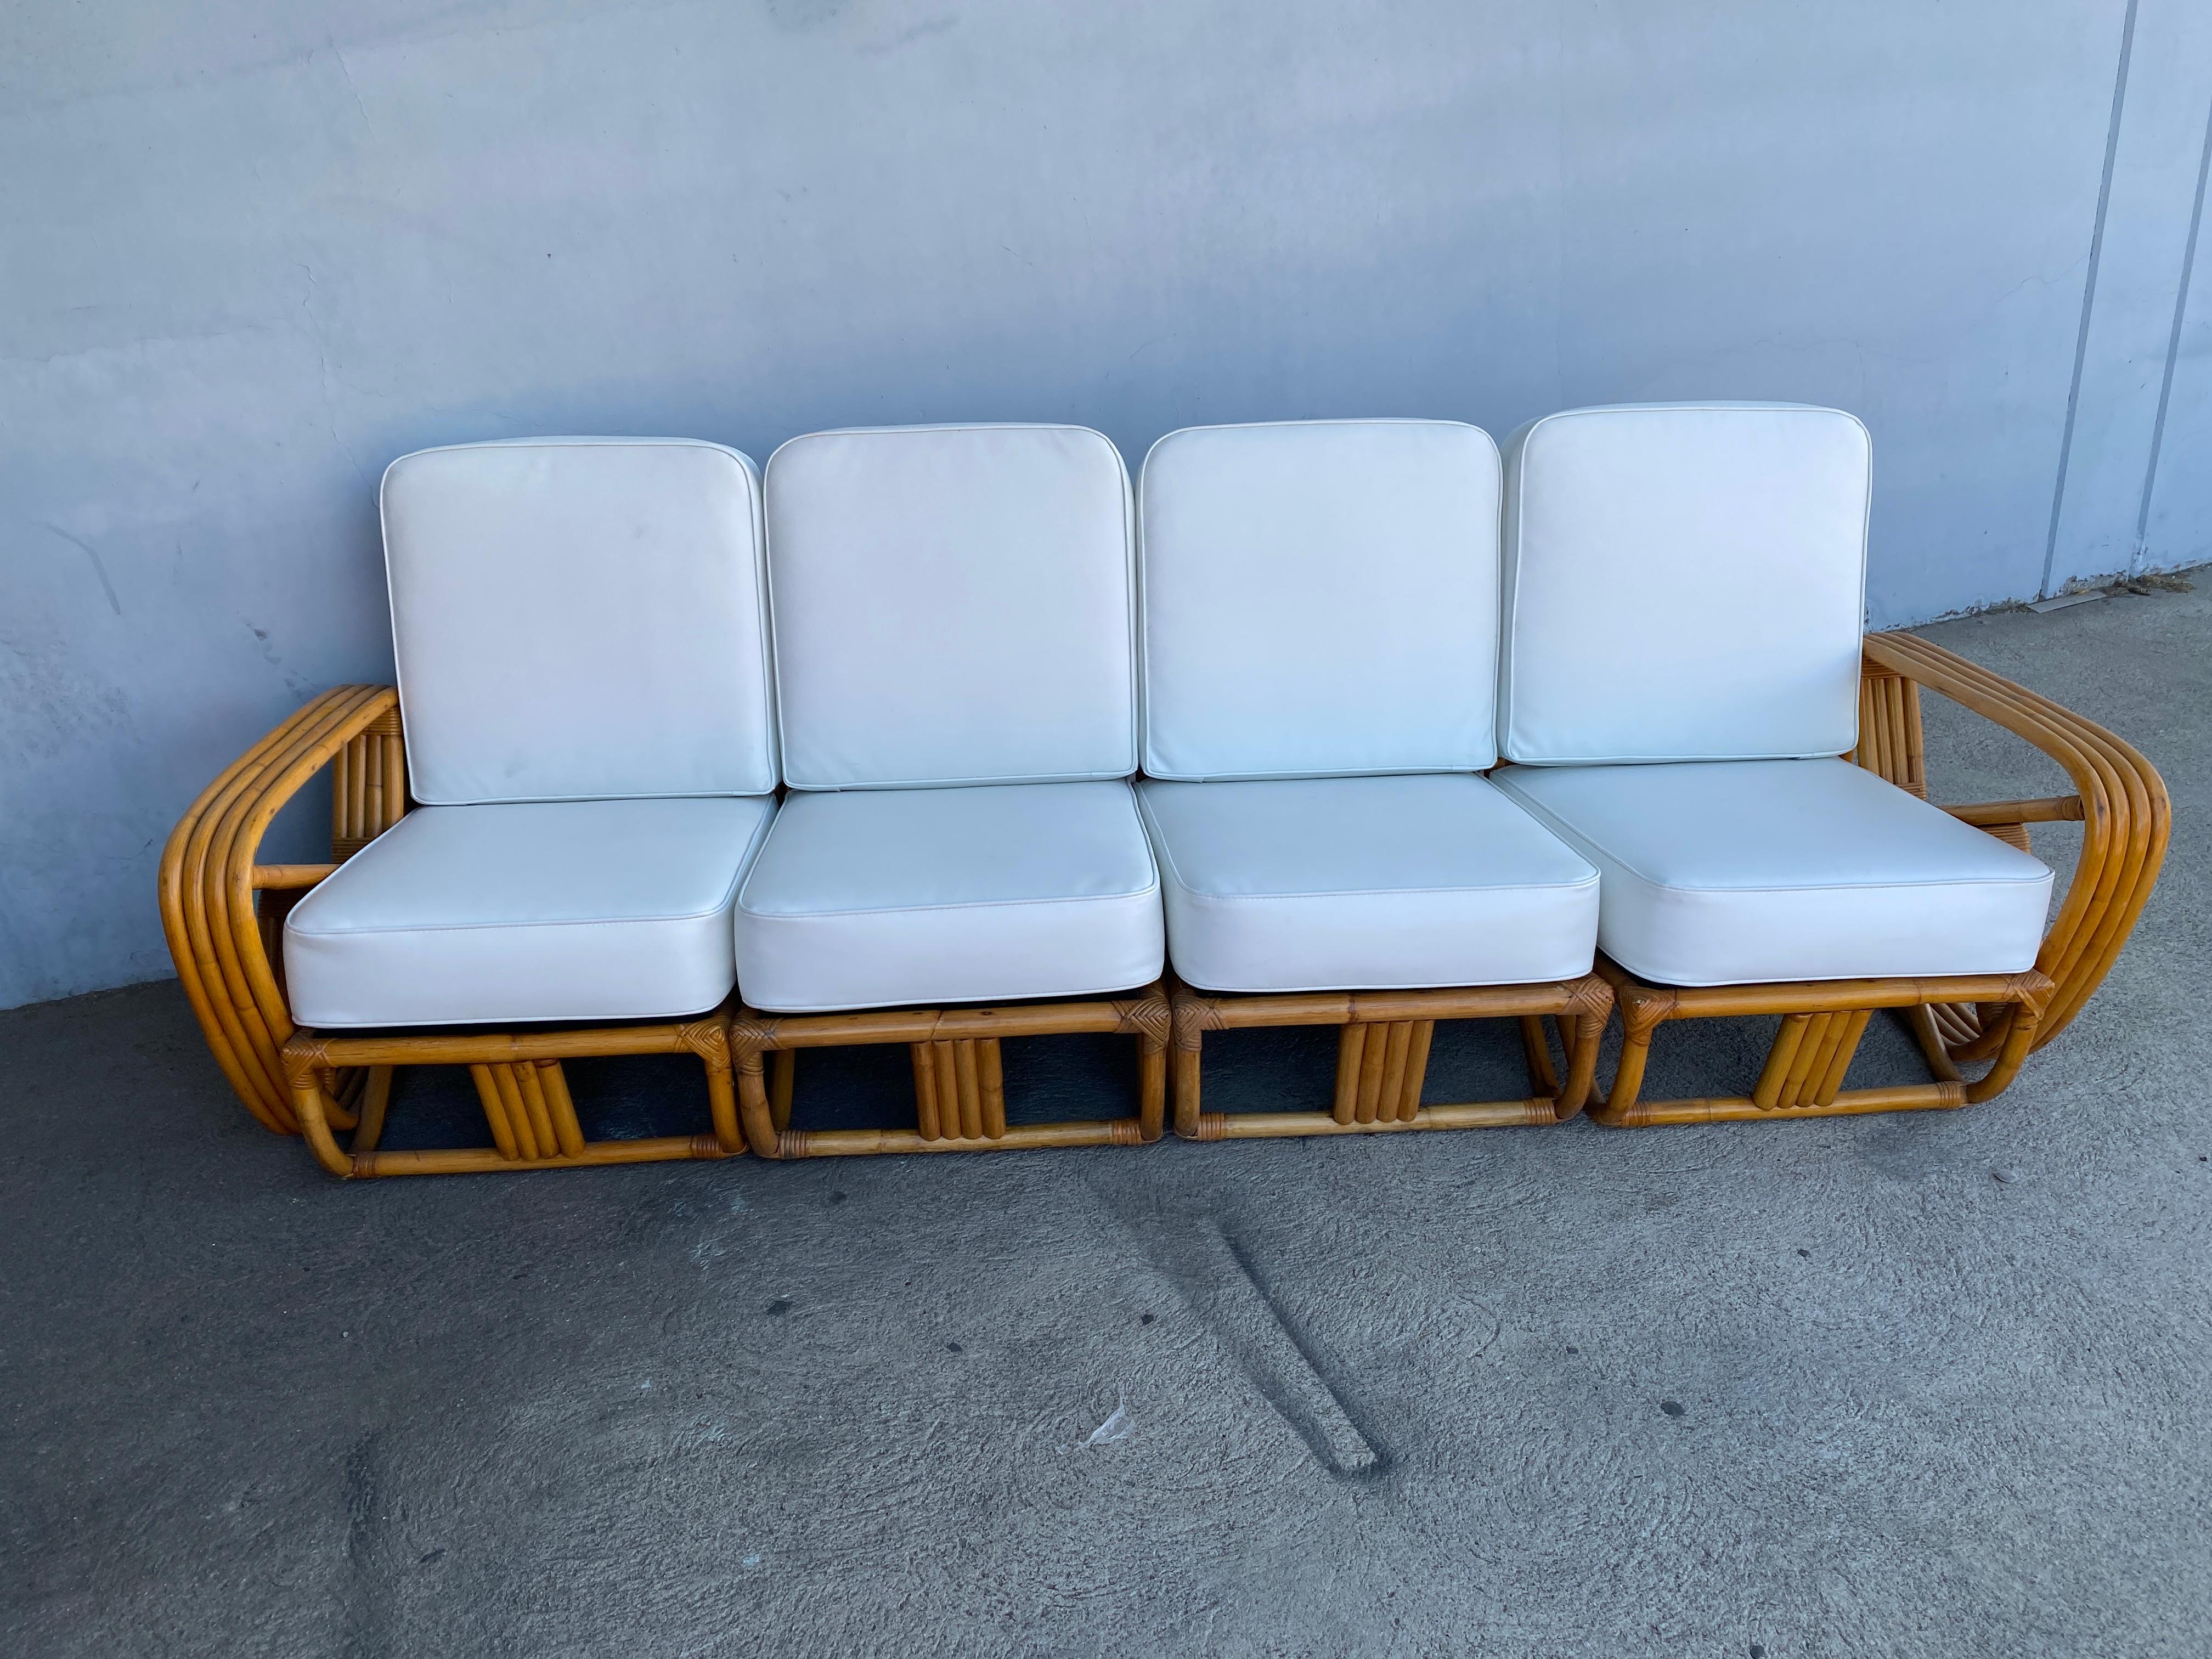 Art Deco era four-strand square pretzel style, Four-seat sectional sofa. This sofa features the famous square pretzel side arms with a unique Zig-Zag pattern in the arm and stacked rattan base.

Restored new for you.

Tropical Sun Rattan was